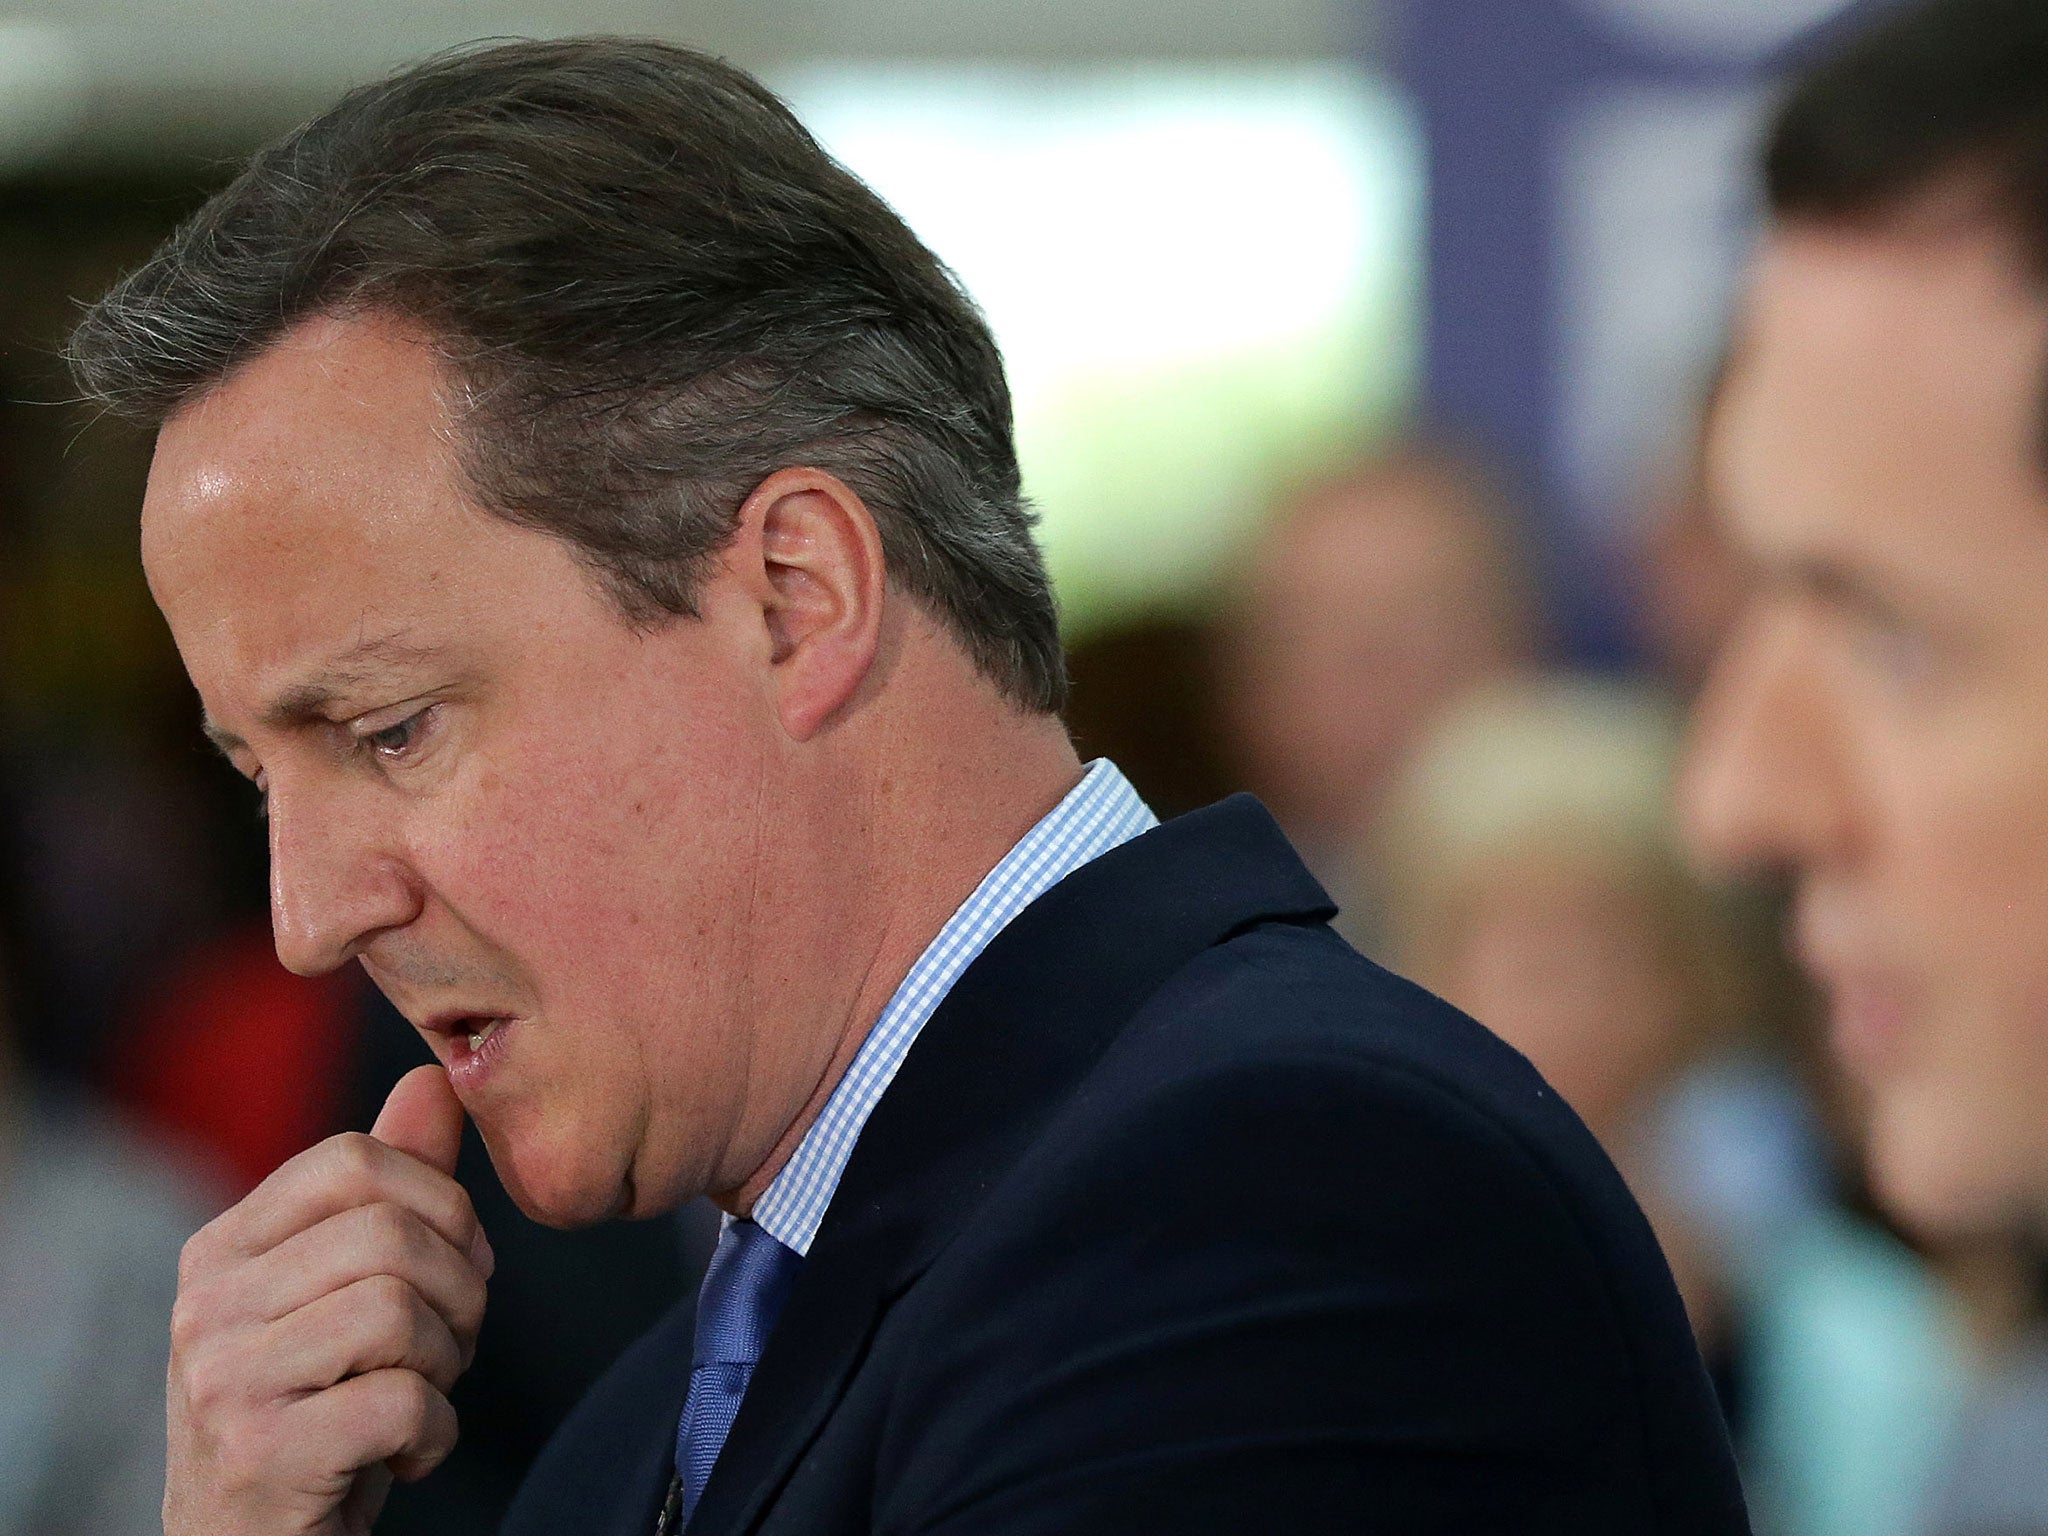 Some Tory MPs reportedly want David Cameron removed